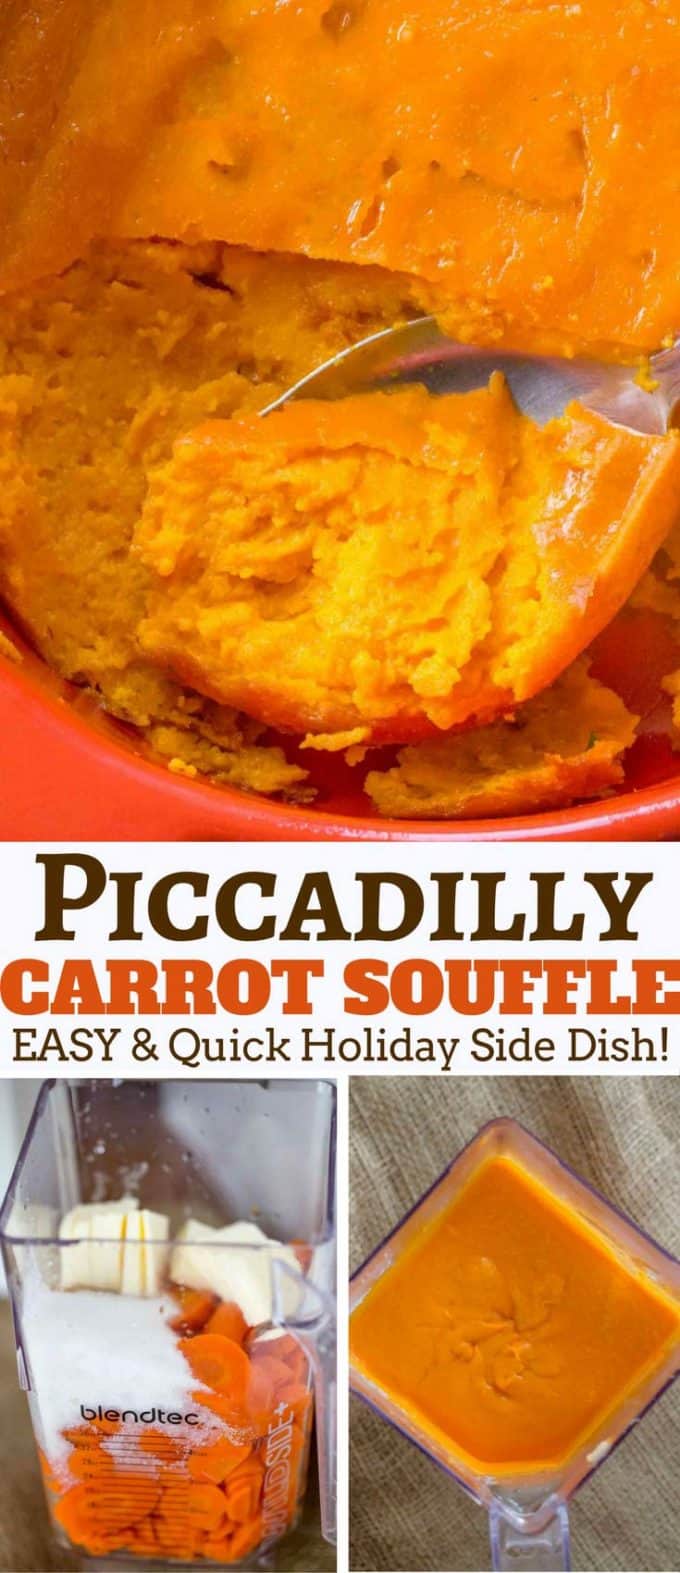 Piccadilly Cafeteria's Legendary Carrot Soufflé Copycat is made with sweet and fluffy with amazing flavor and the perfect addition to your holiday menu. #holidays #recipe #carrot #souffle #easy dev.dinnerthendessert.com